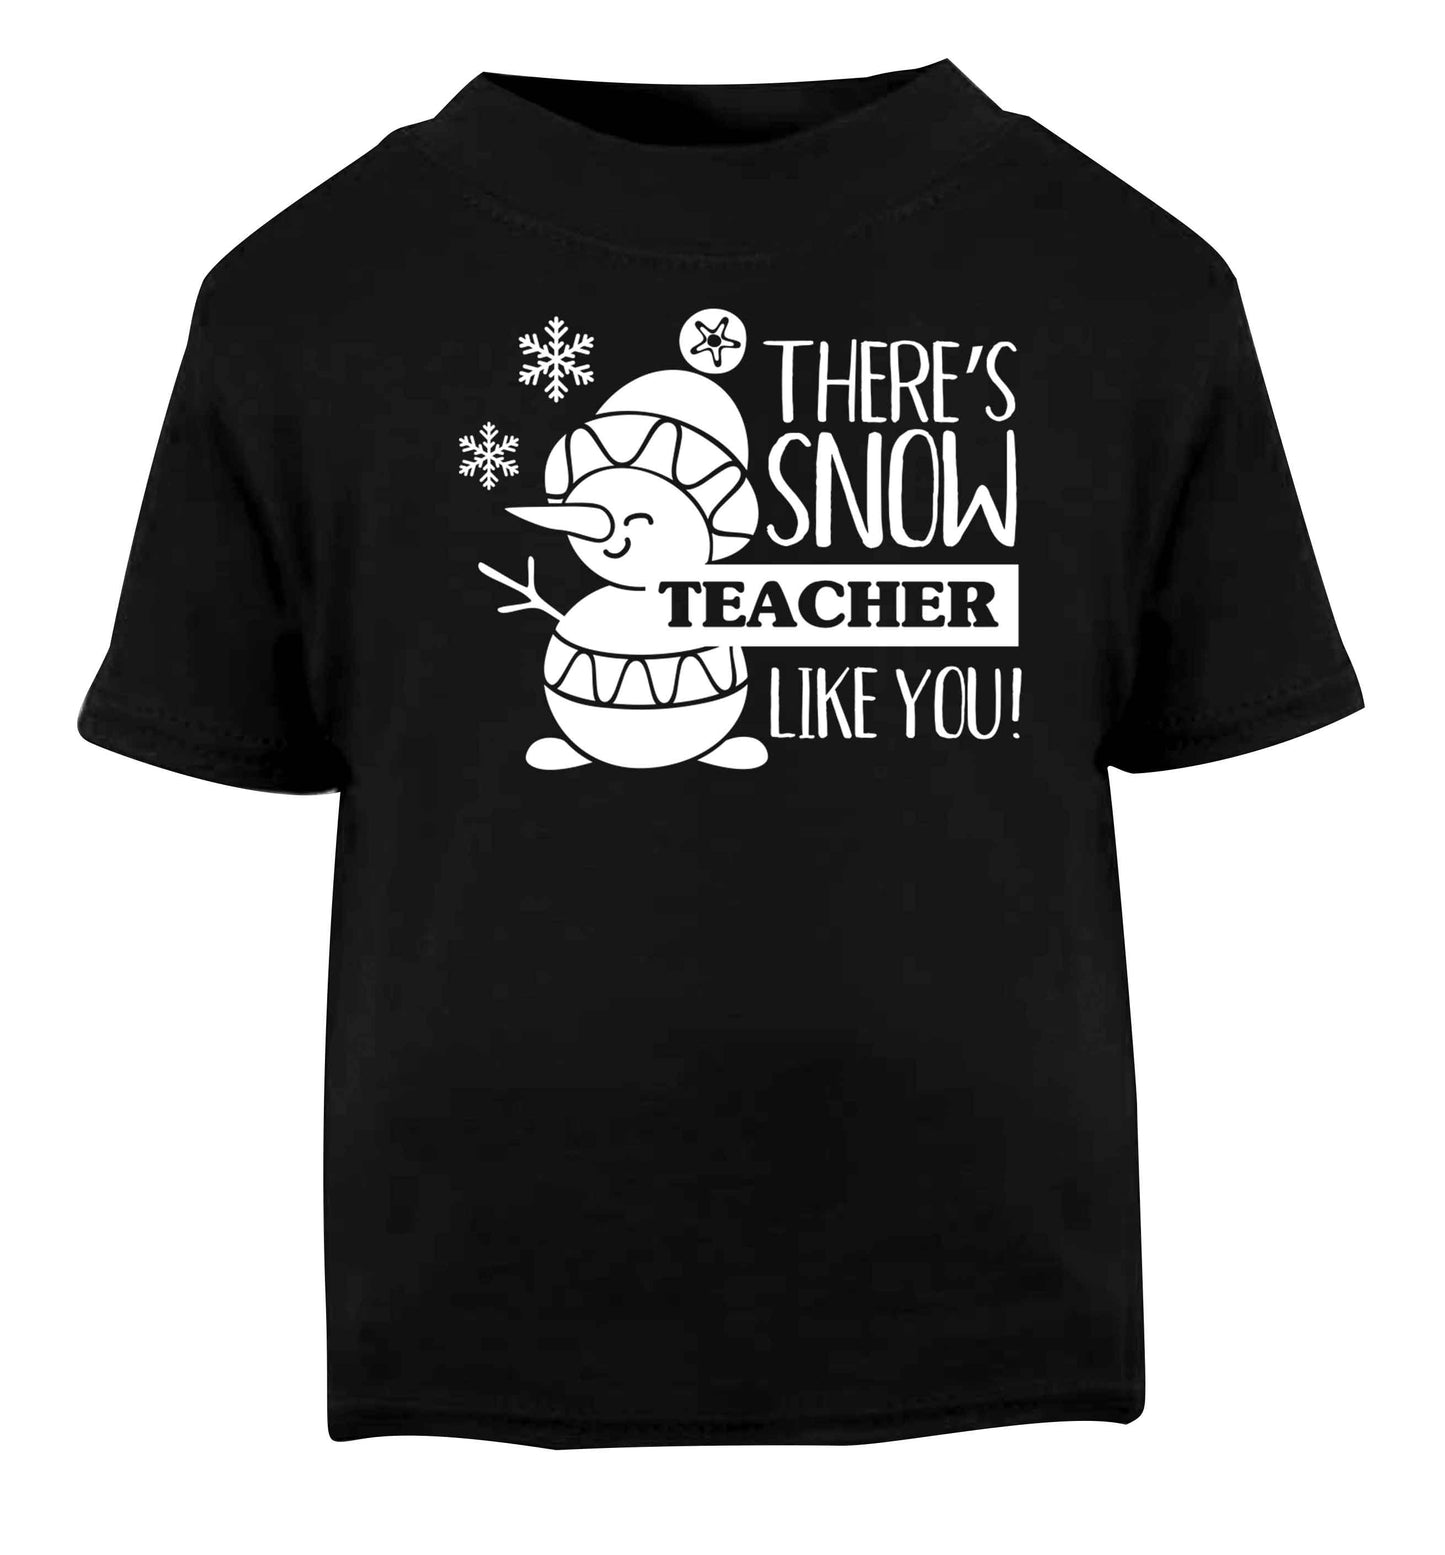 There's snow teacher like you Black baby toddler Tshirt 2 years